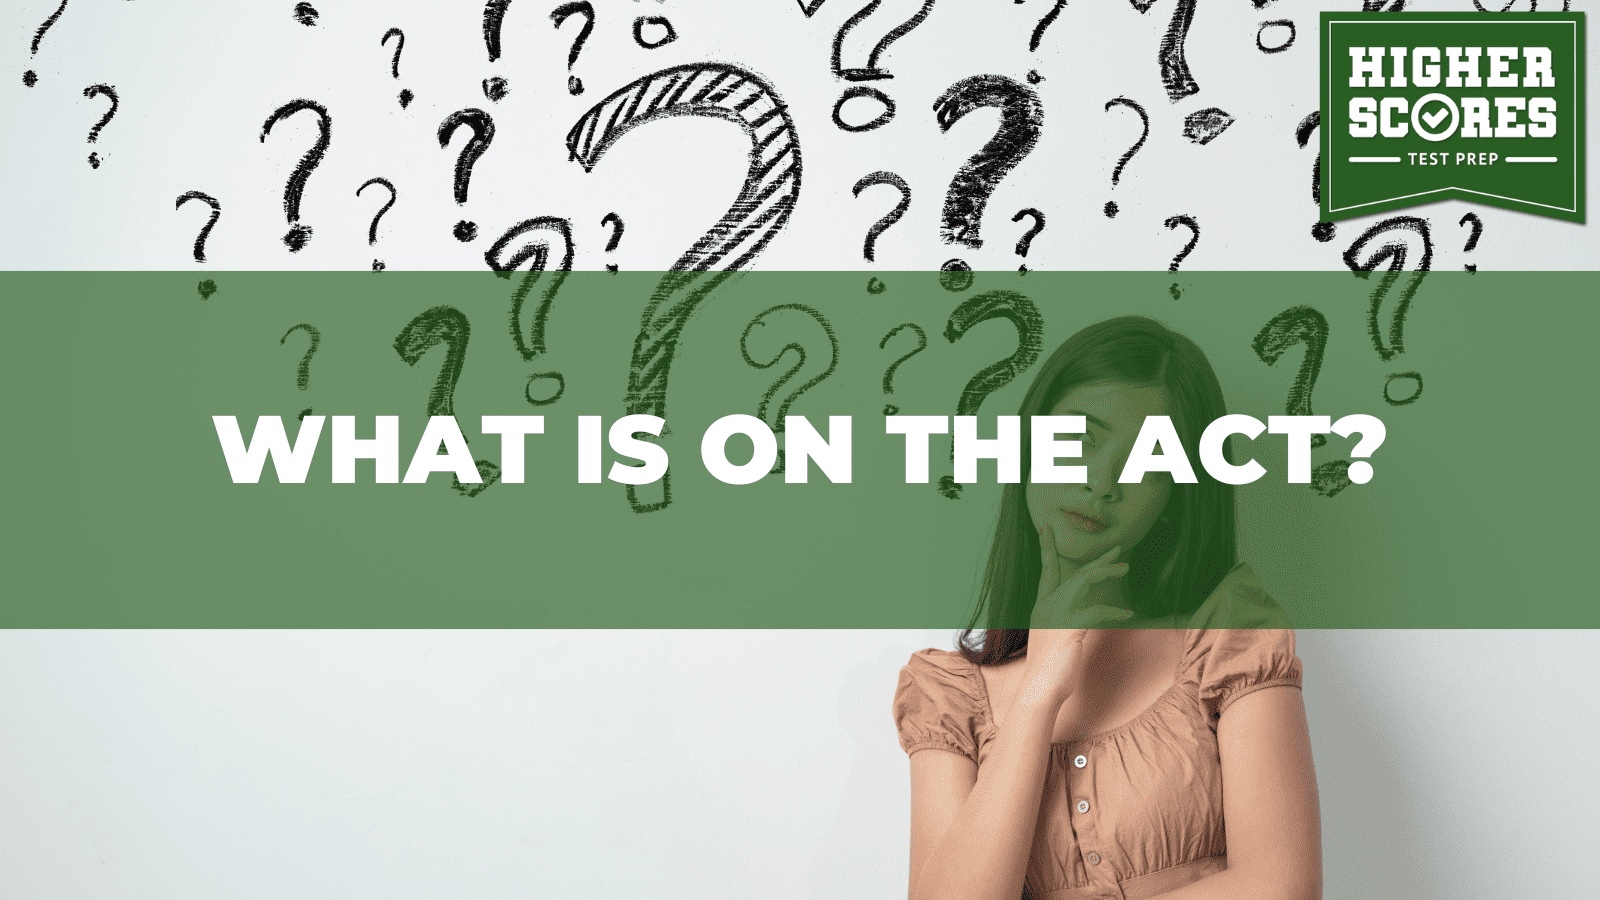 What is on the ACT?